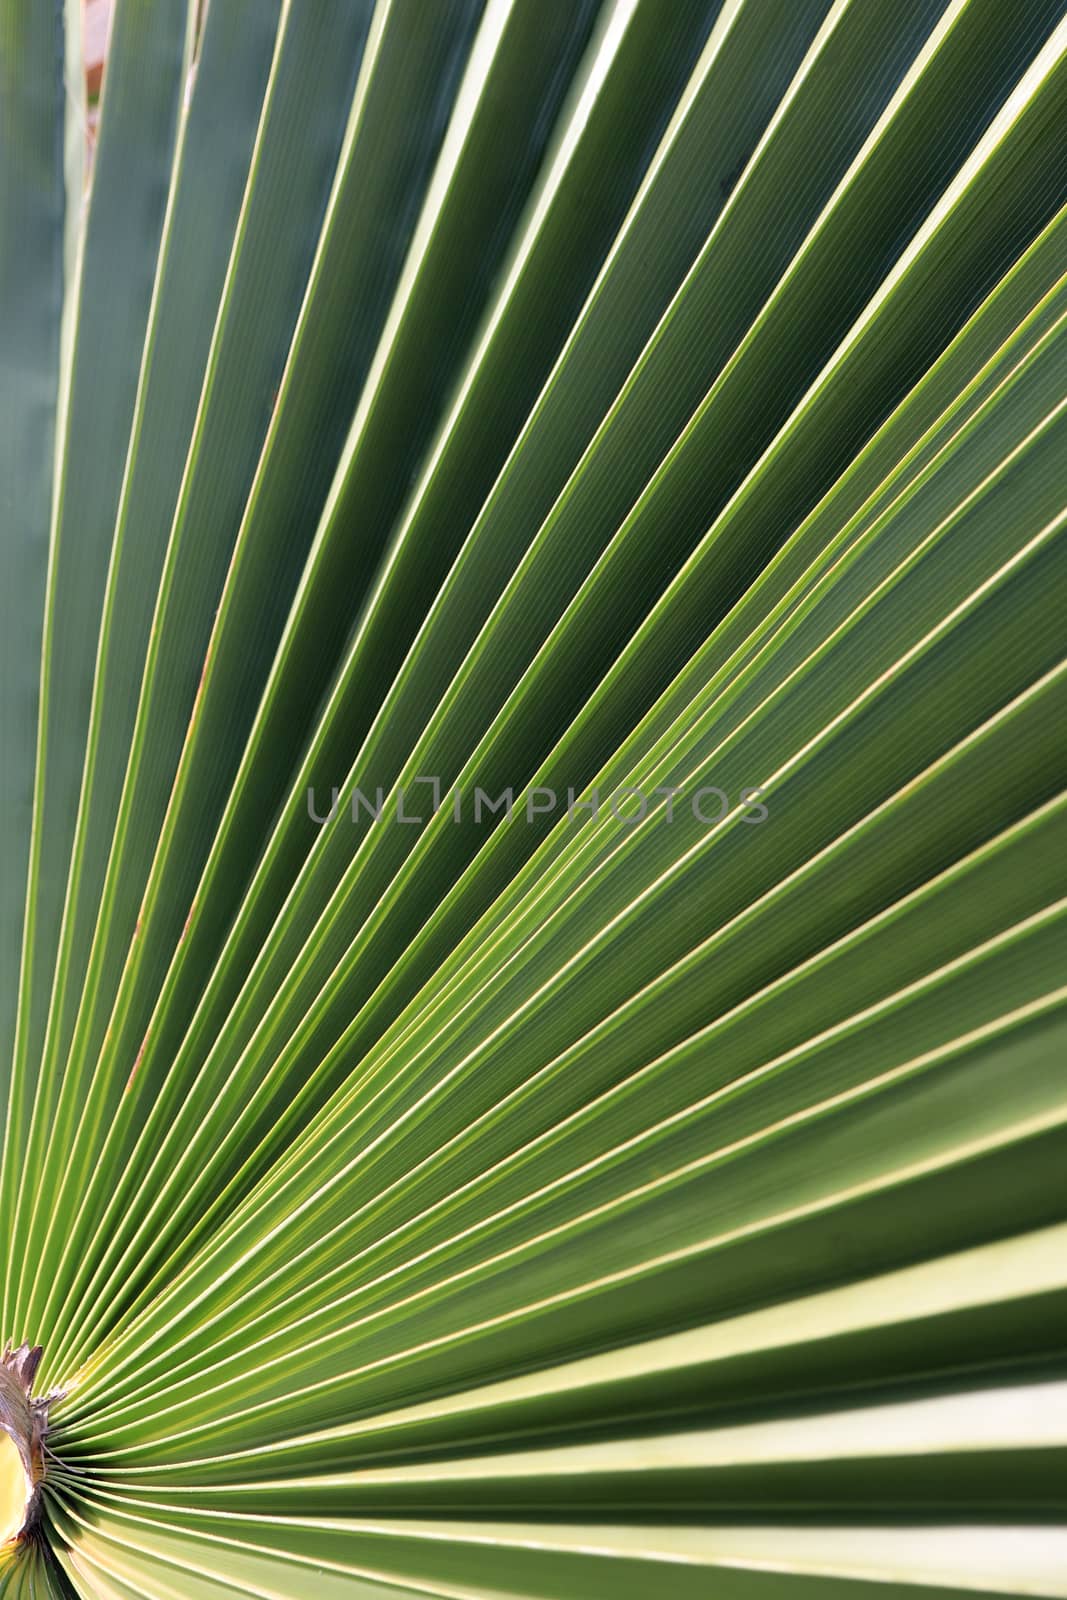 Exotic tree branch background. Palm leaf texture.